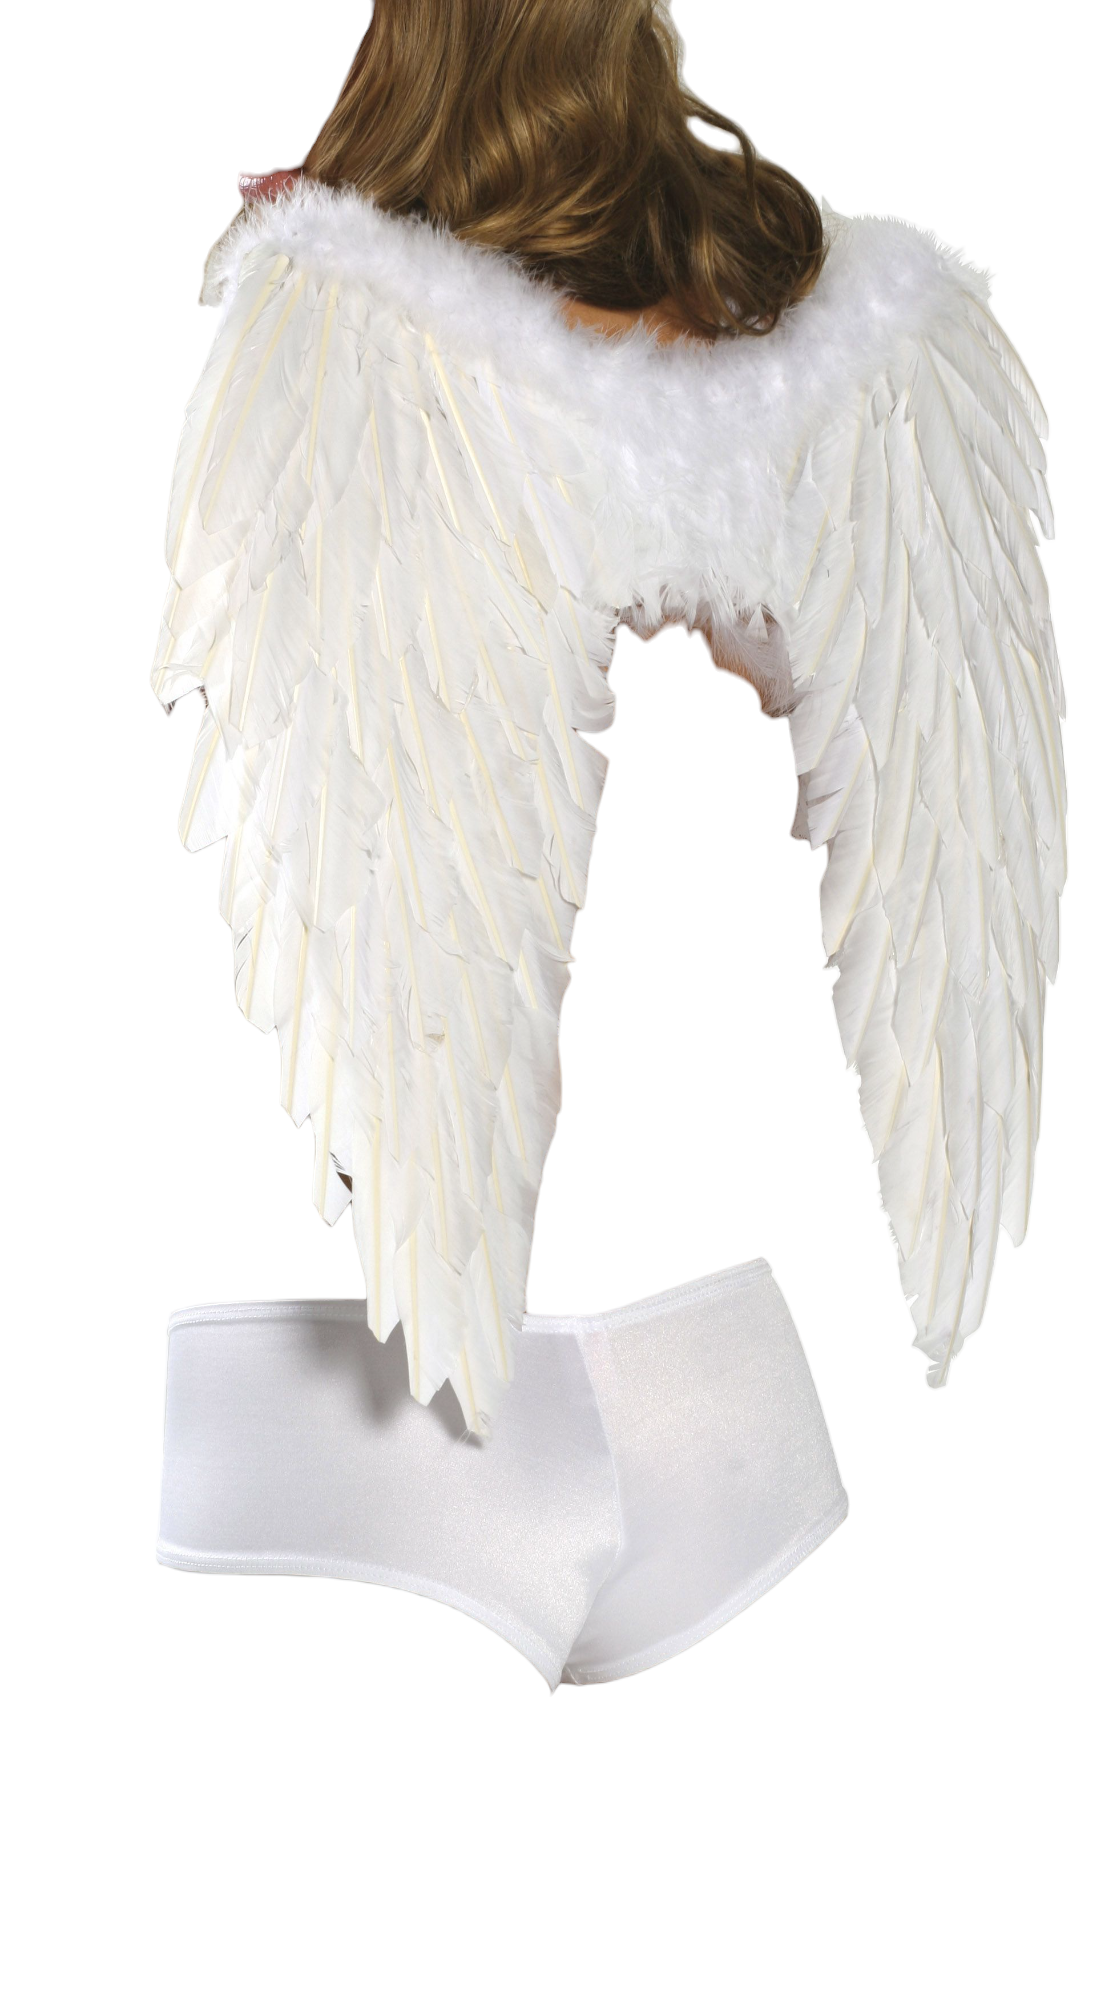 Roma Costume Feathered Wings One Size